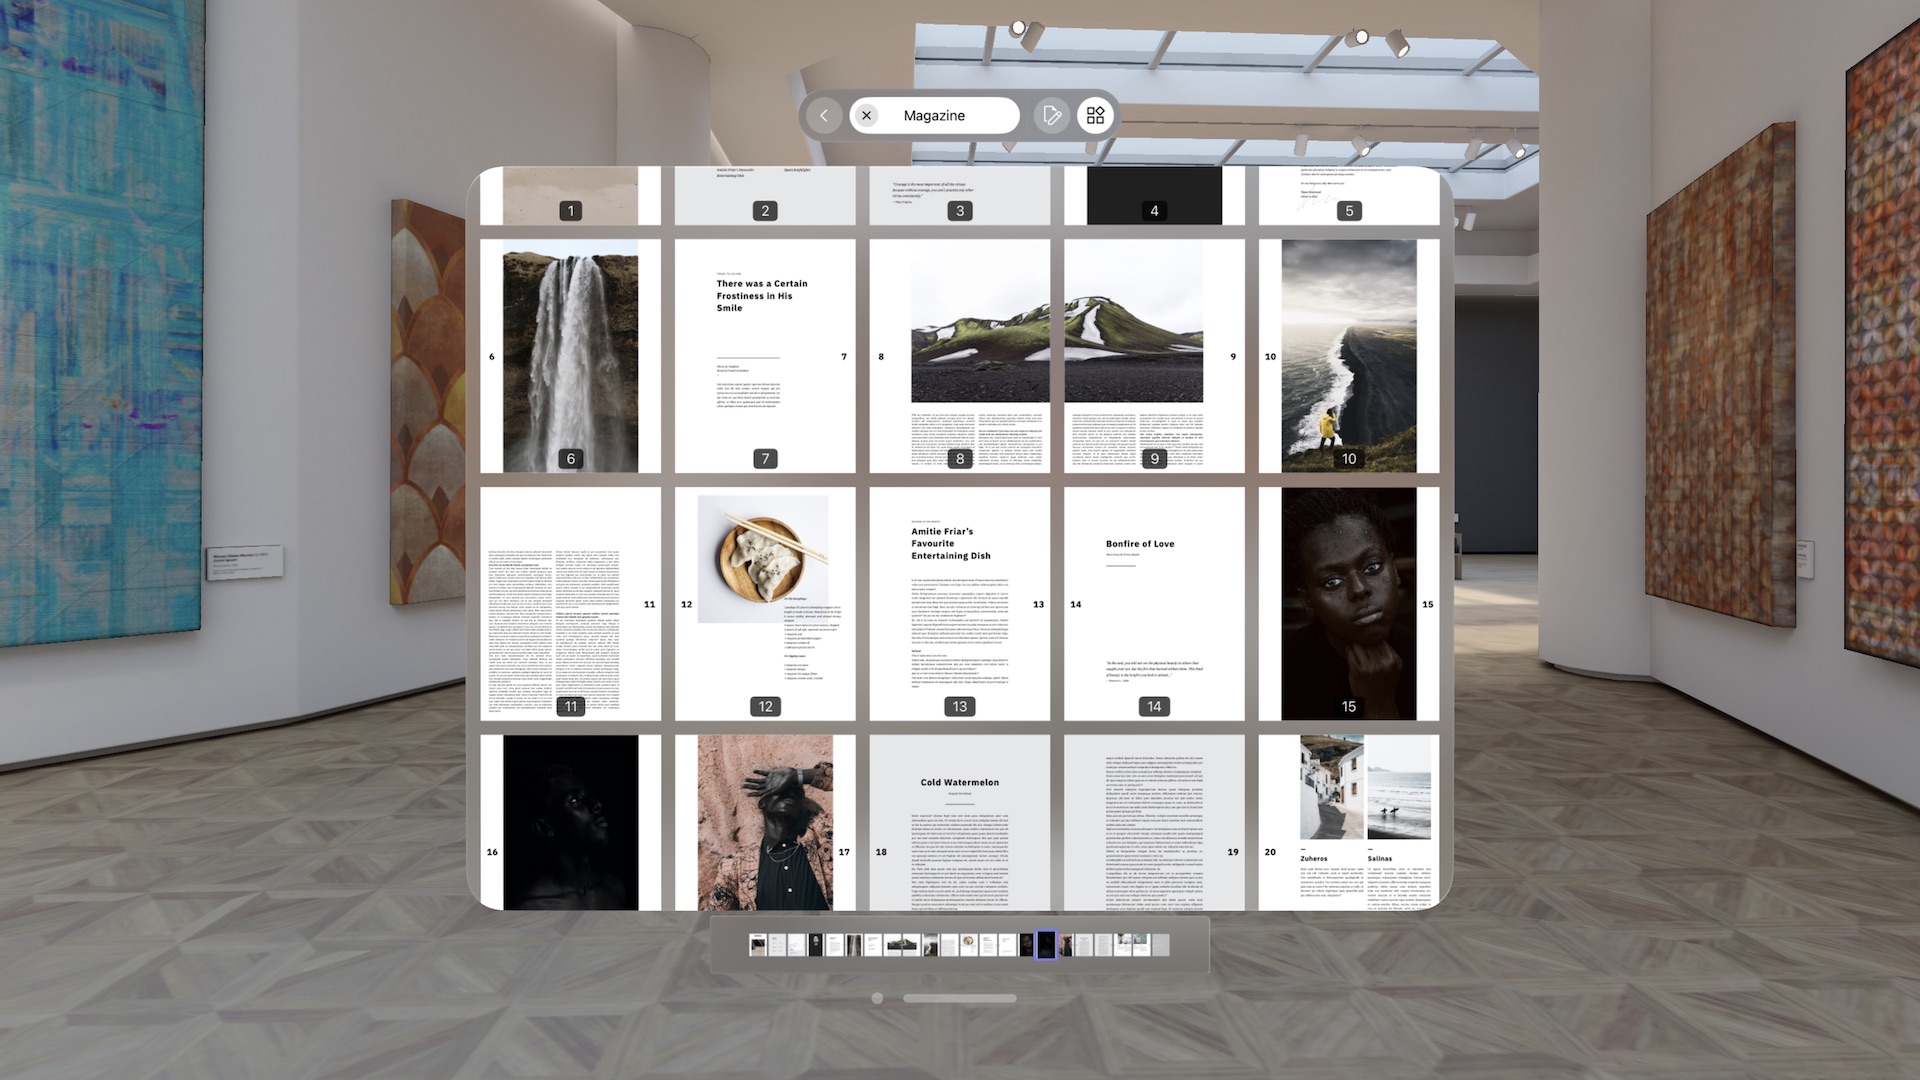 Screenshot showing a thumbnail grid of pages in a magazine in an Apple Vision Pro window in a museum.